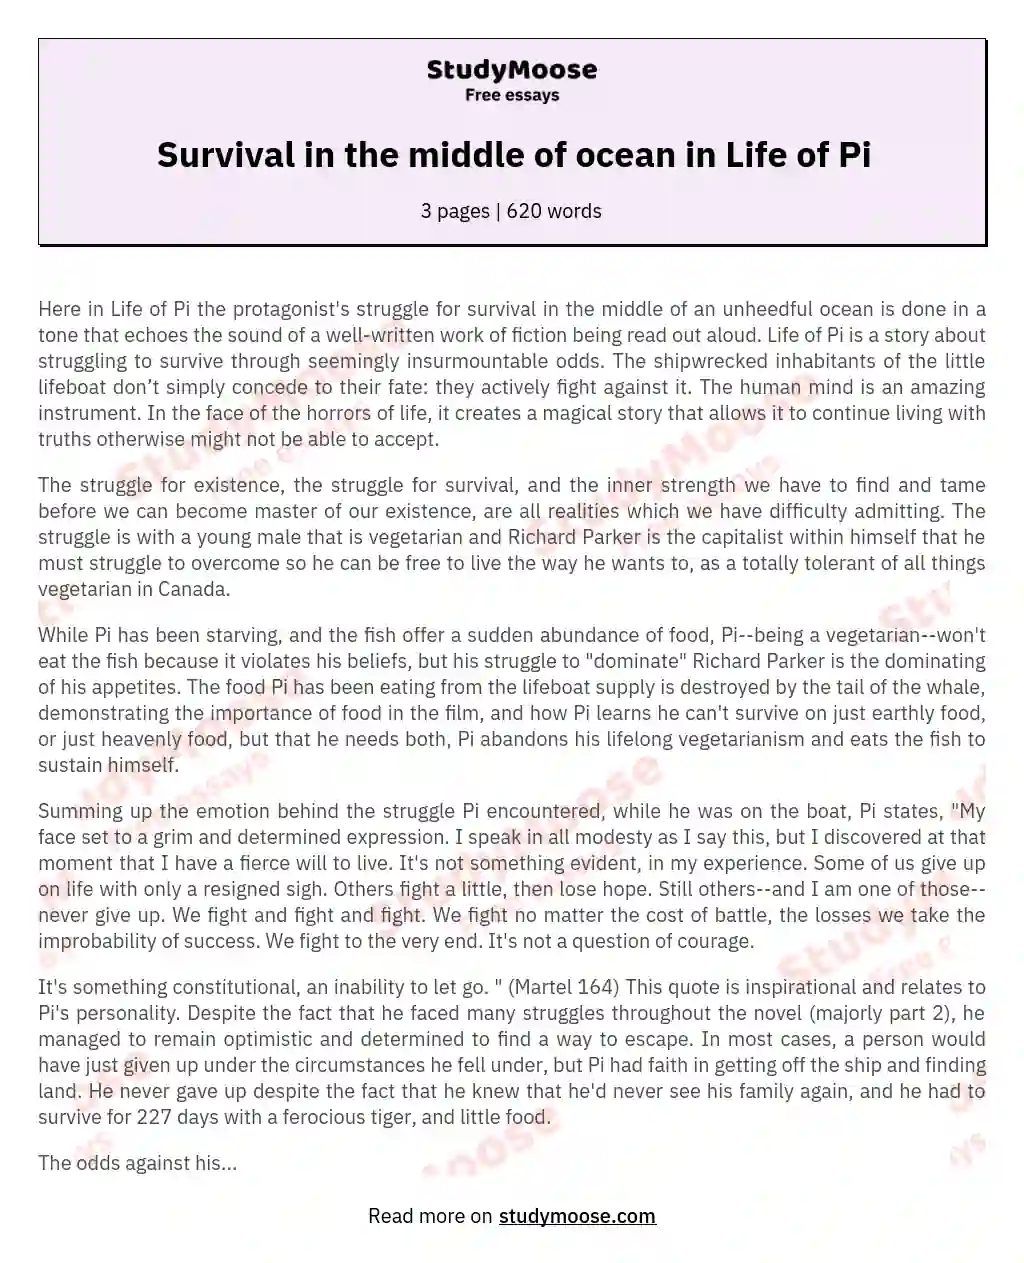 Survival in the middle of ocean in Life of Pi